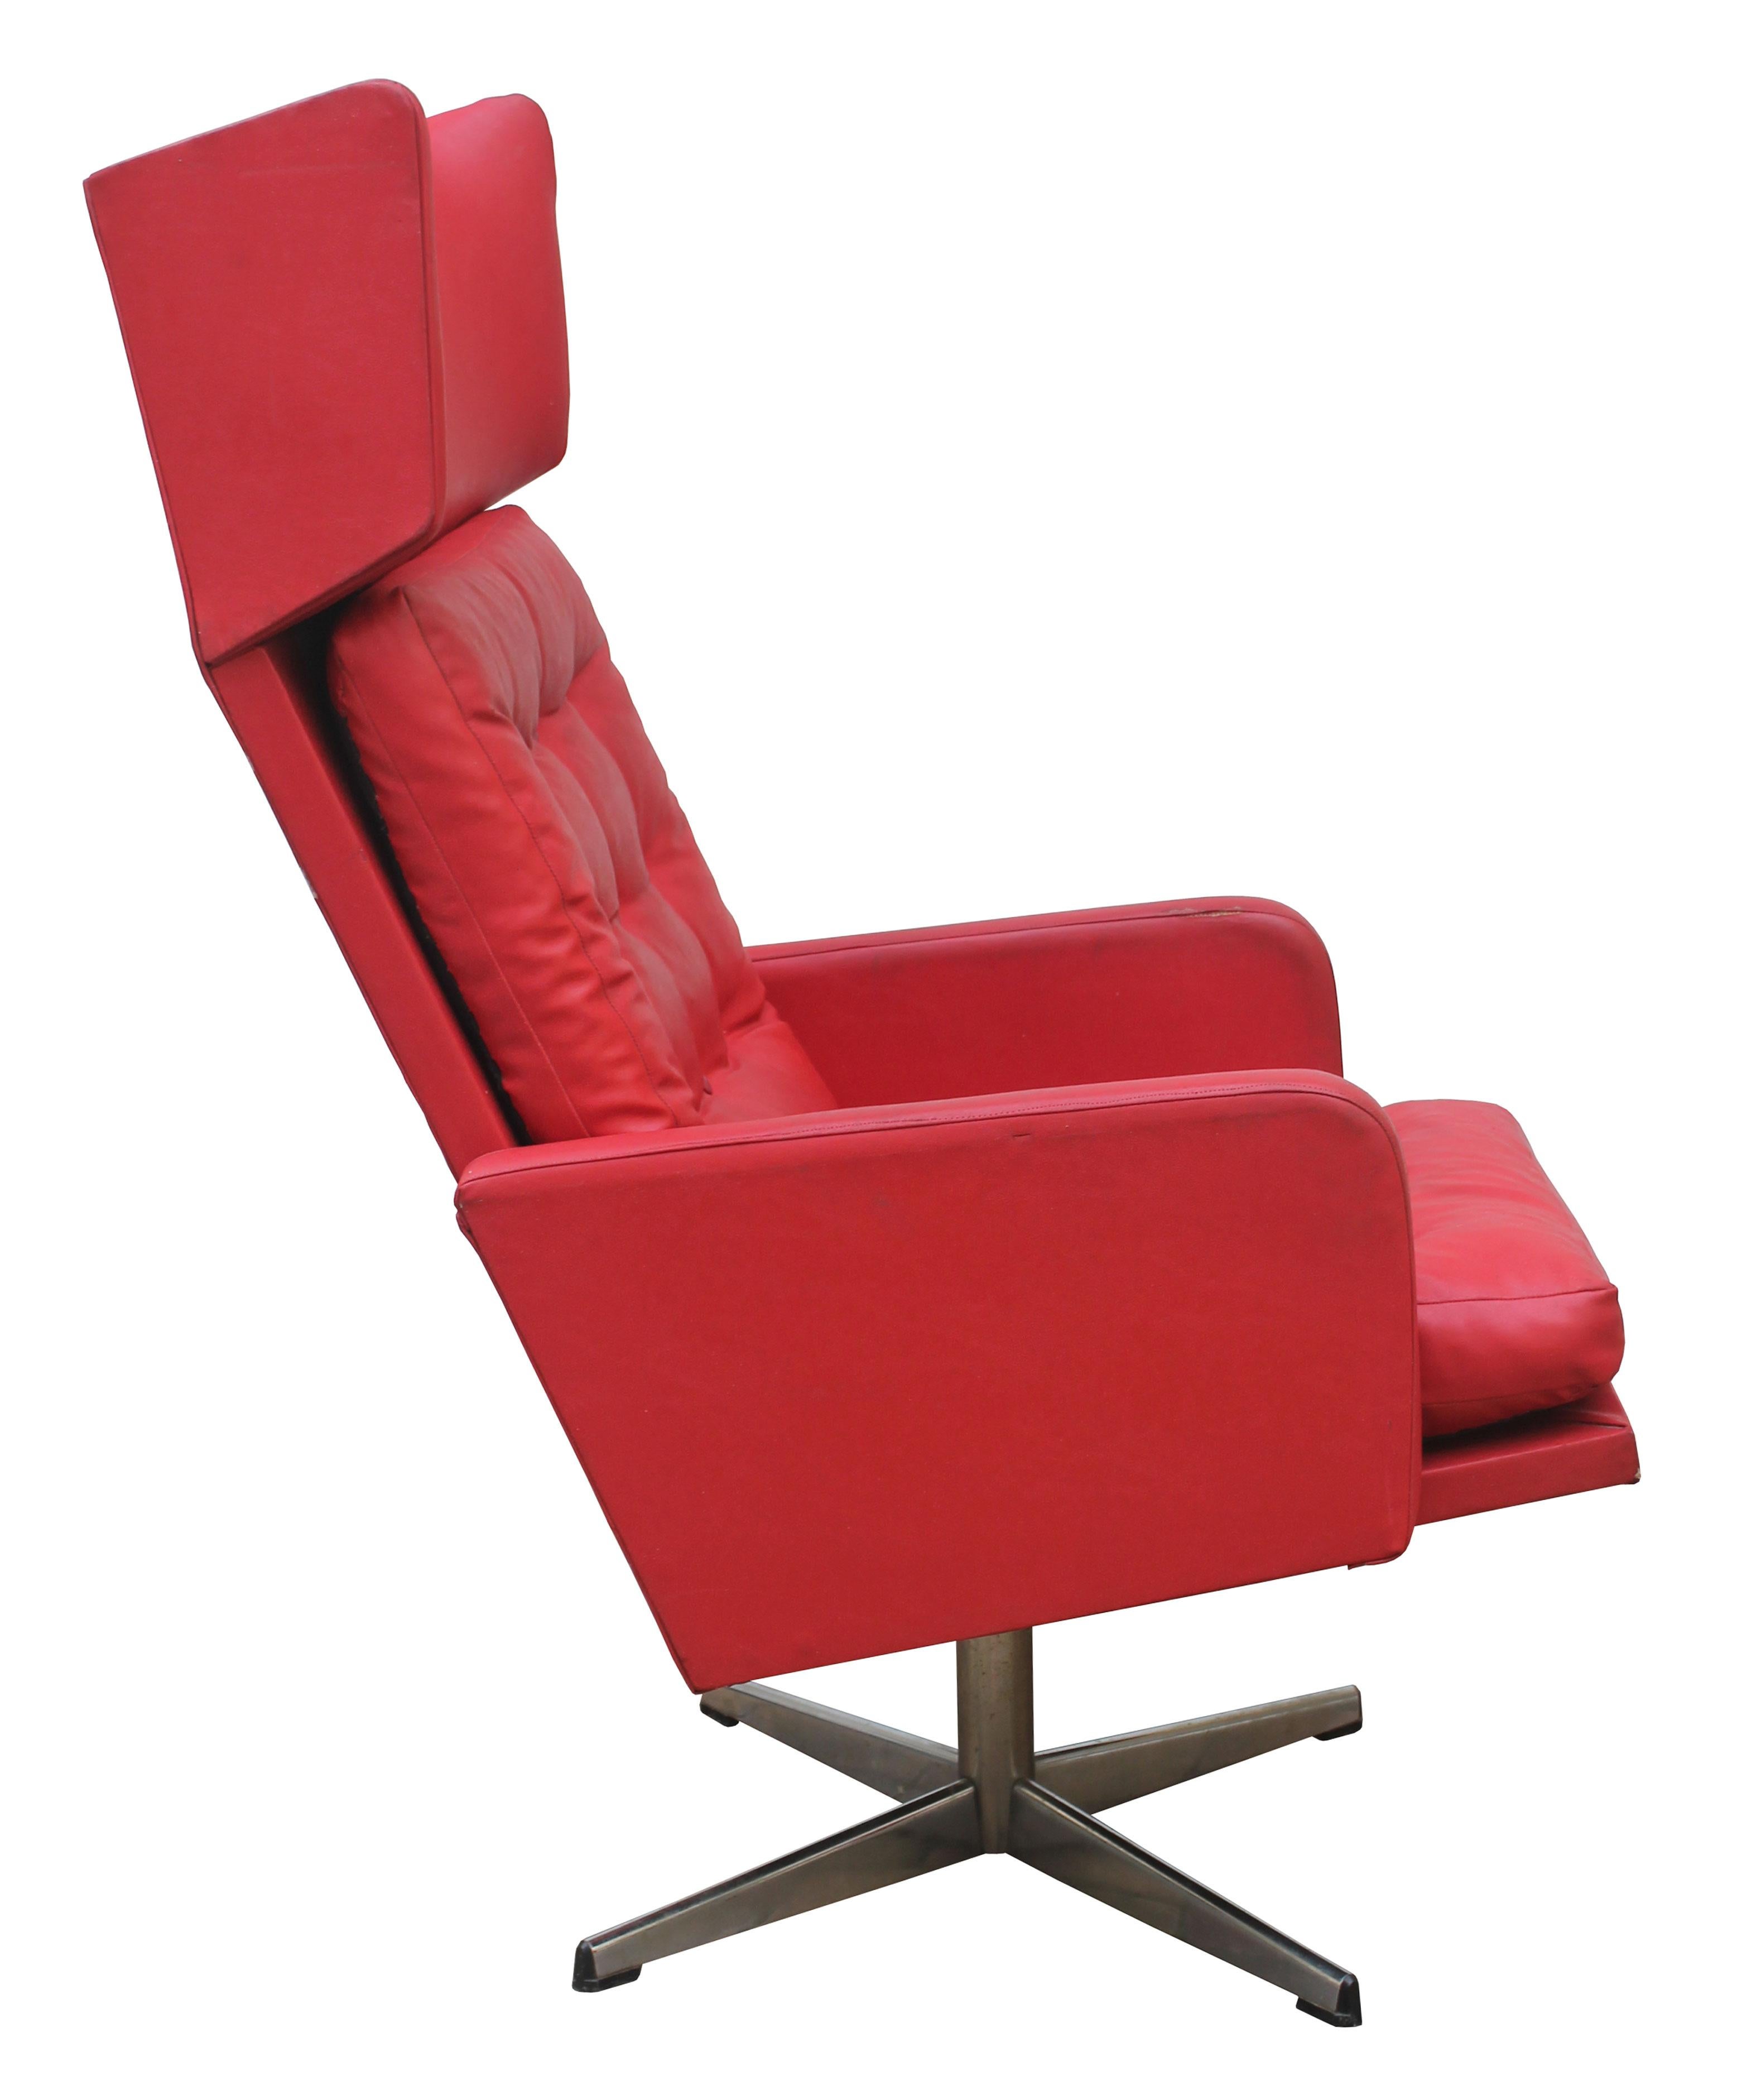 Late 20th Century 1970s Red Leather Swivel Armchair For Sale